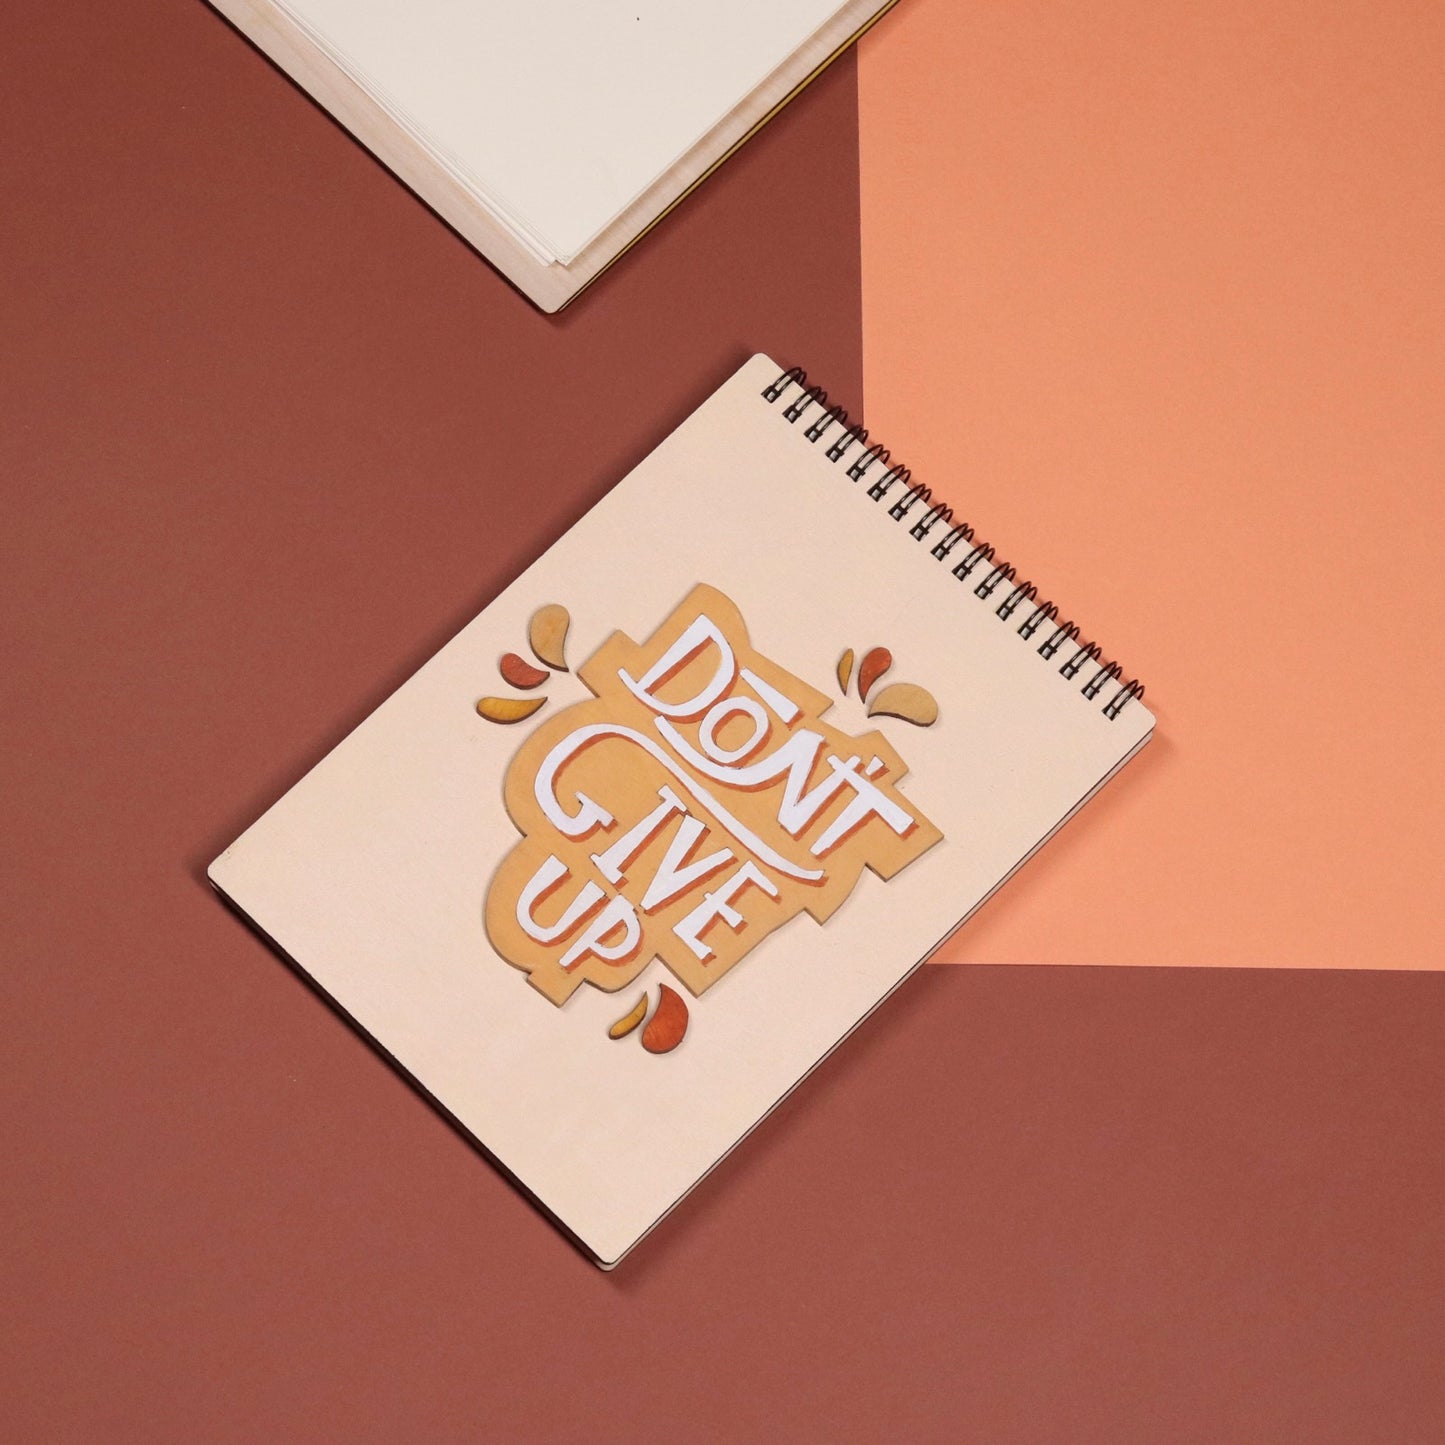 Don't Give Up "Notebook".